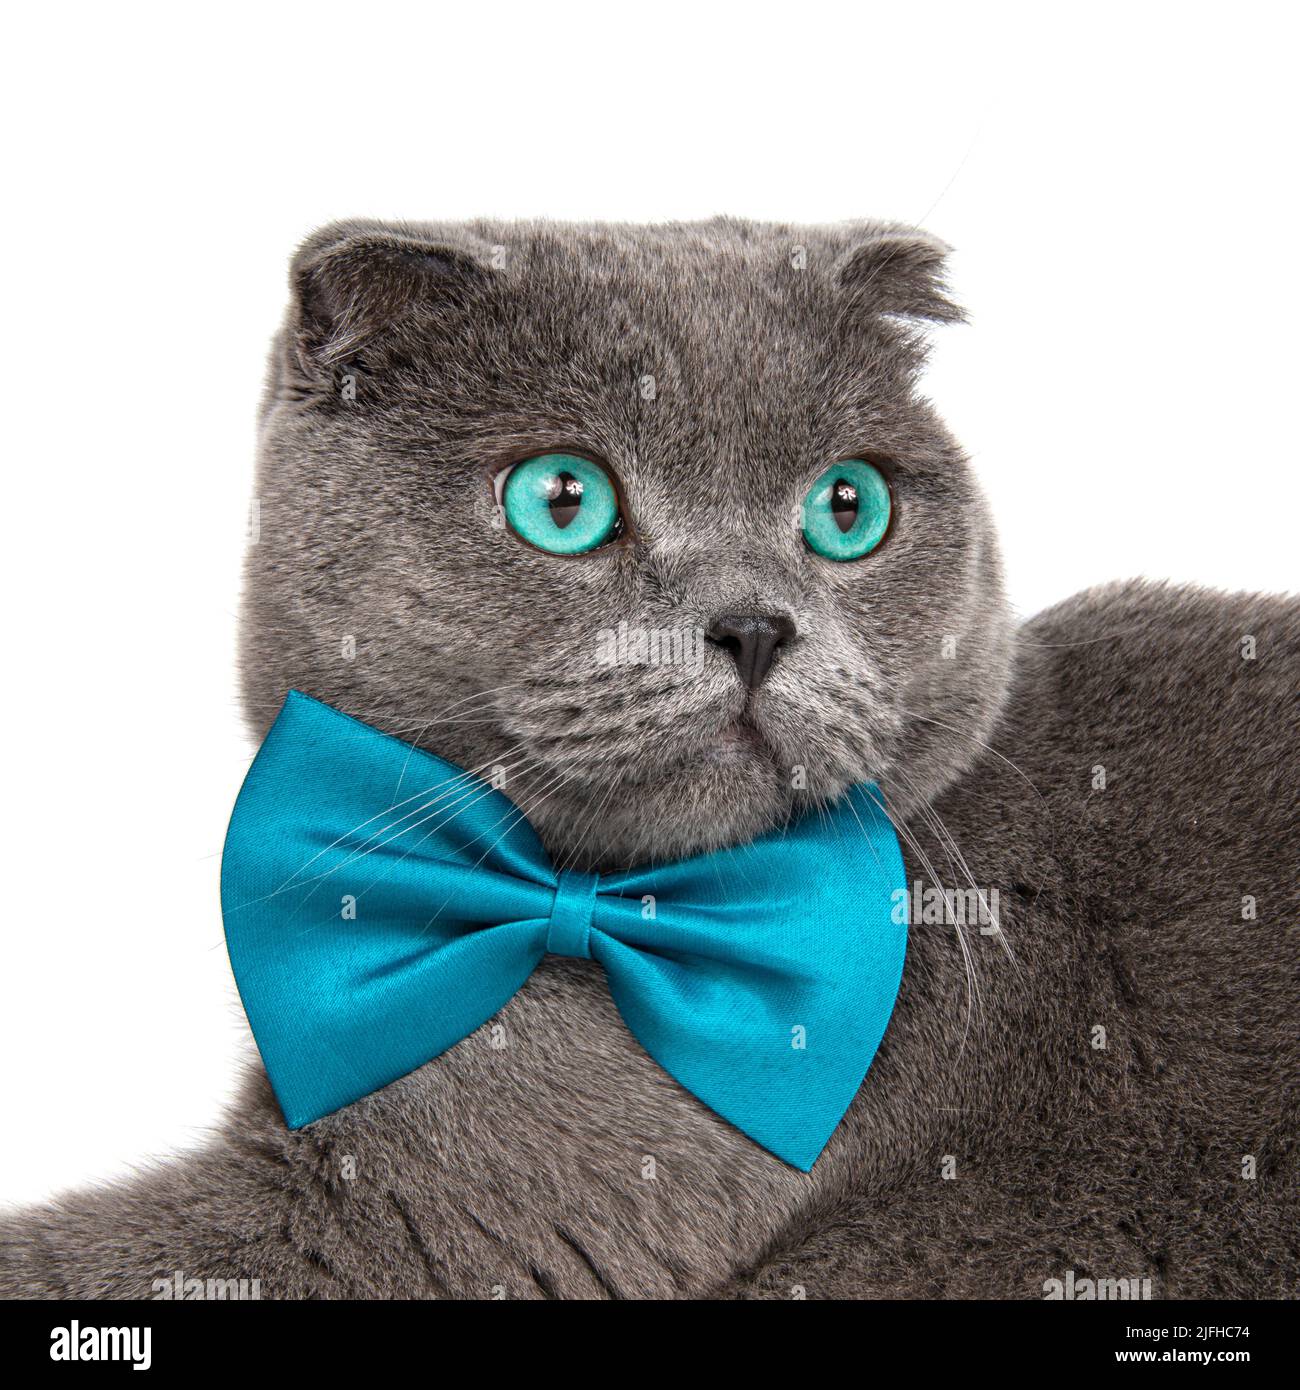 Cute Cat Wearing Coat and Red Bowtie Graphic by vatemplatecards